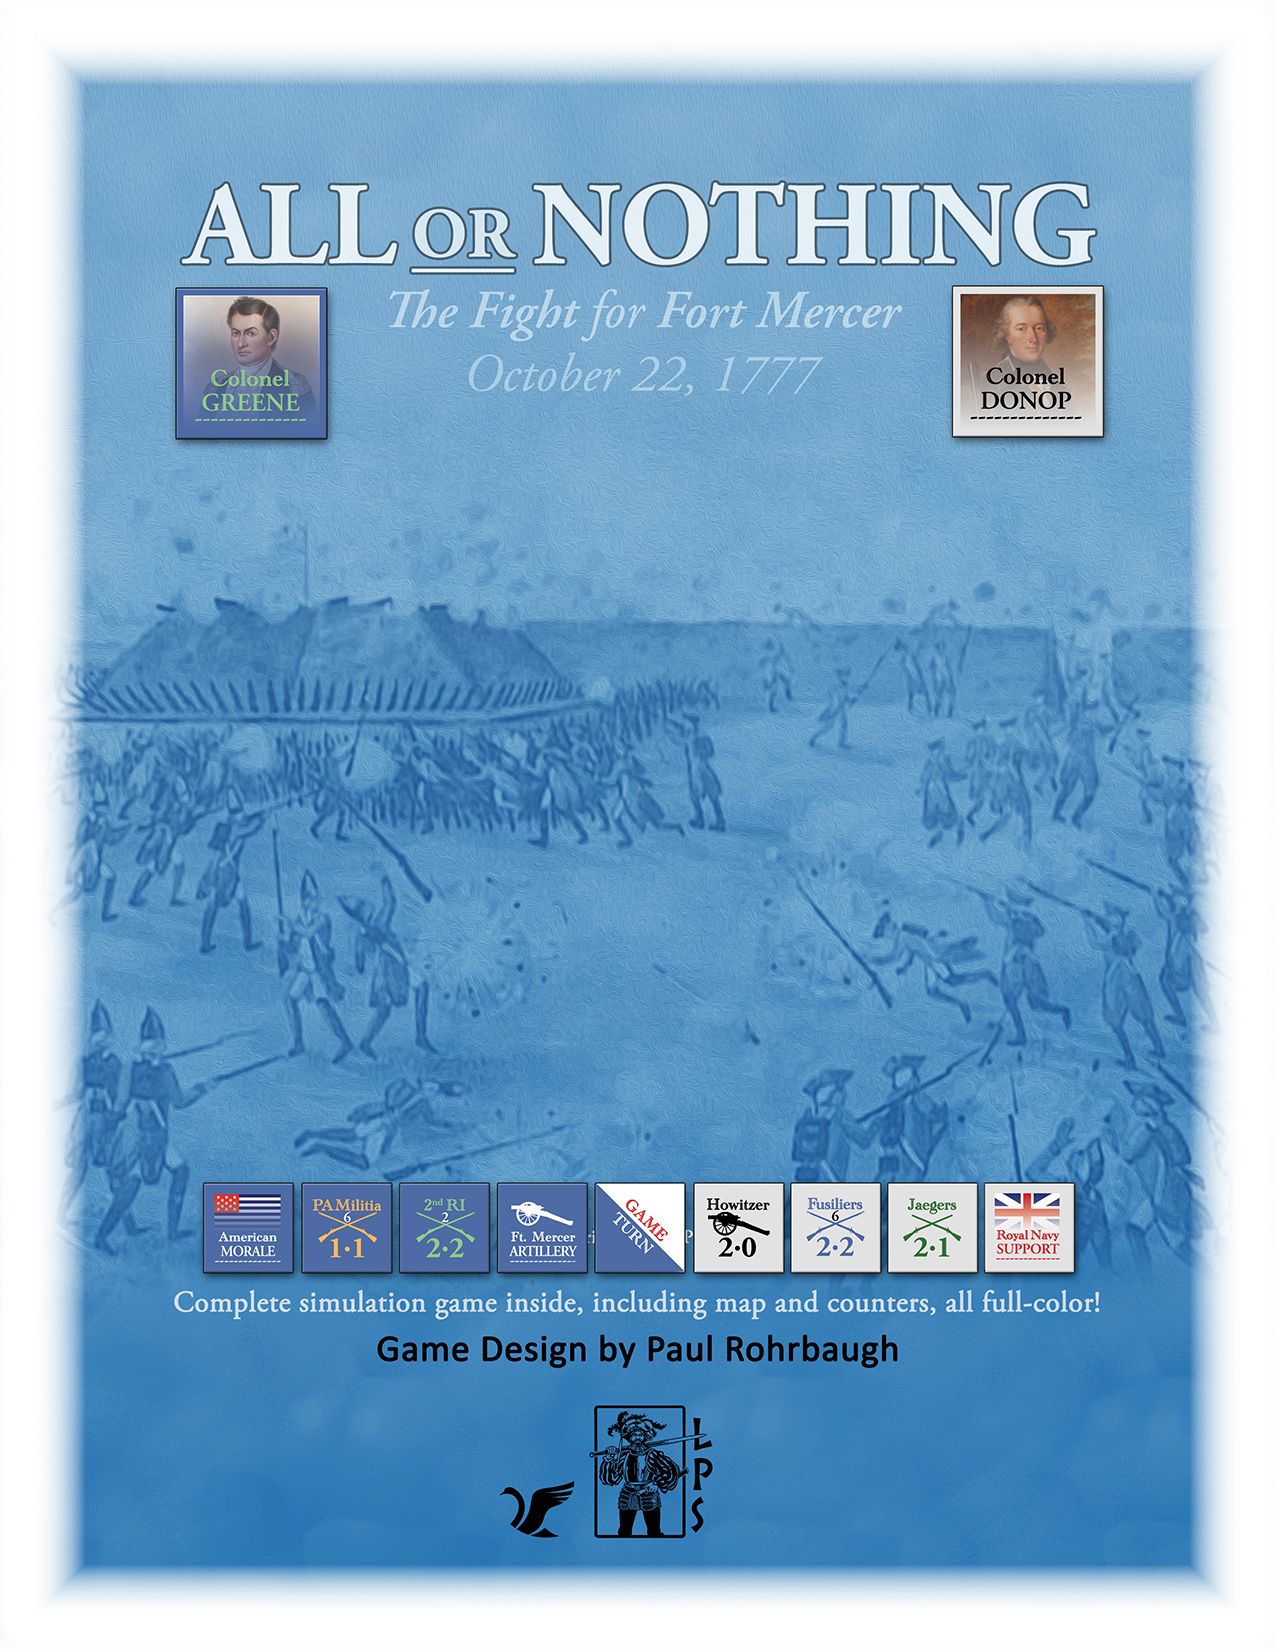 All or Nothing: The Fight for Fort Mercer – October 22, 1777